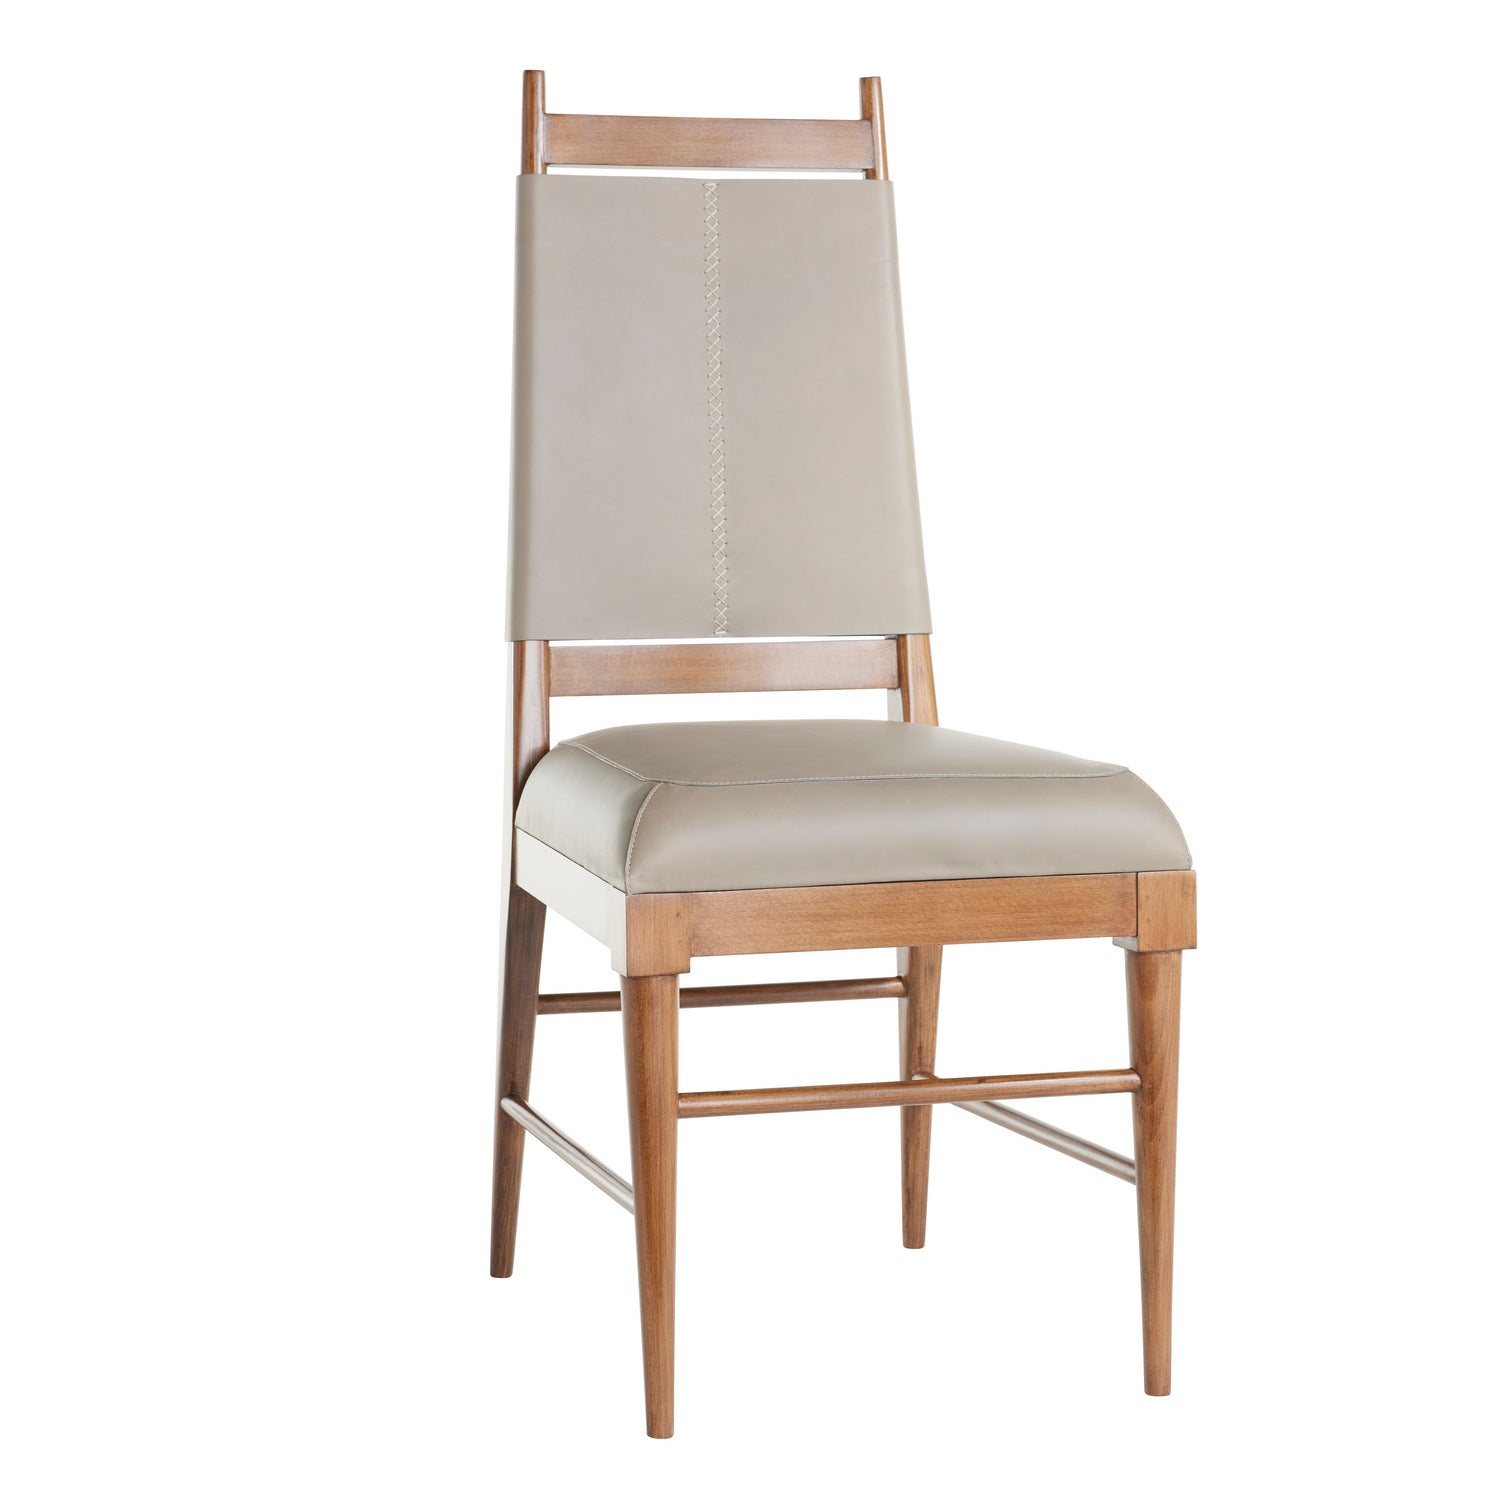 Chair from the Keegan collection in Morel finish